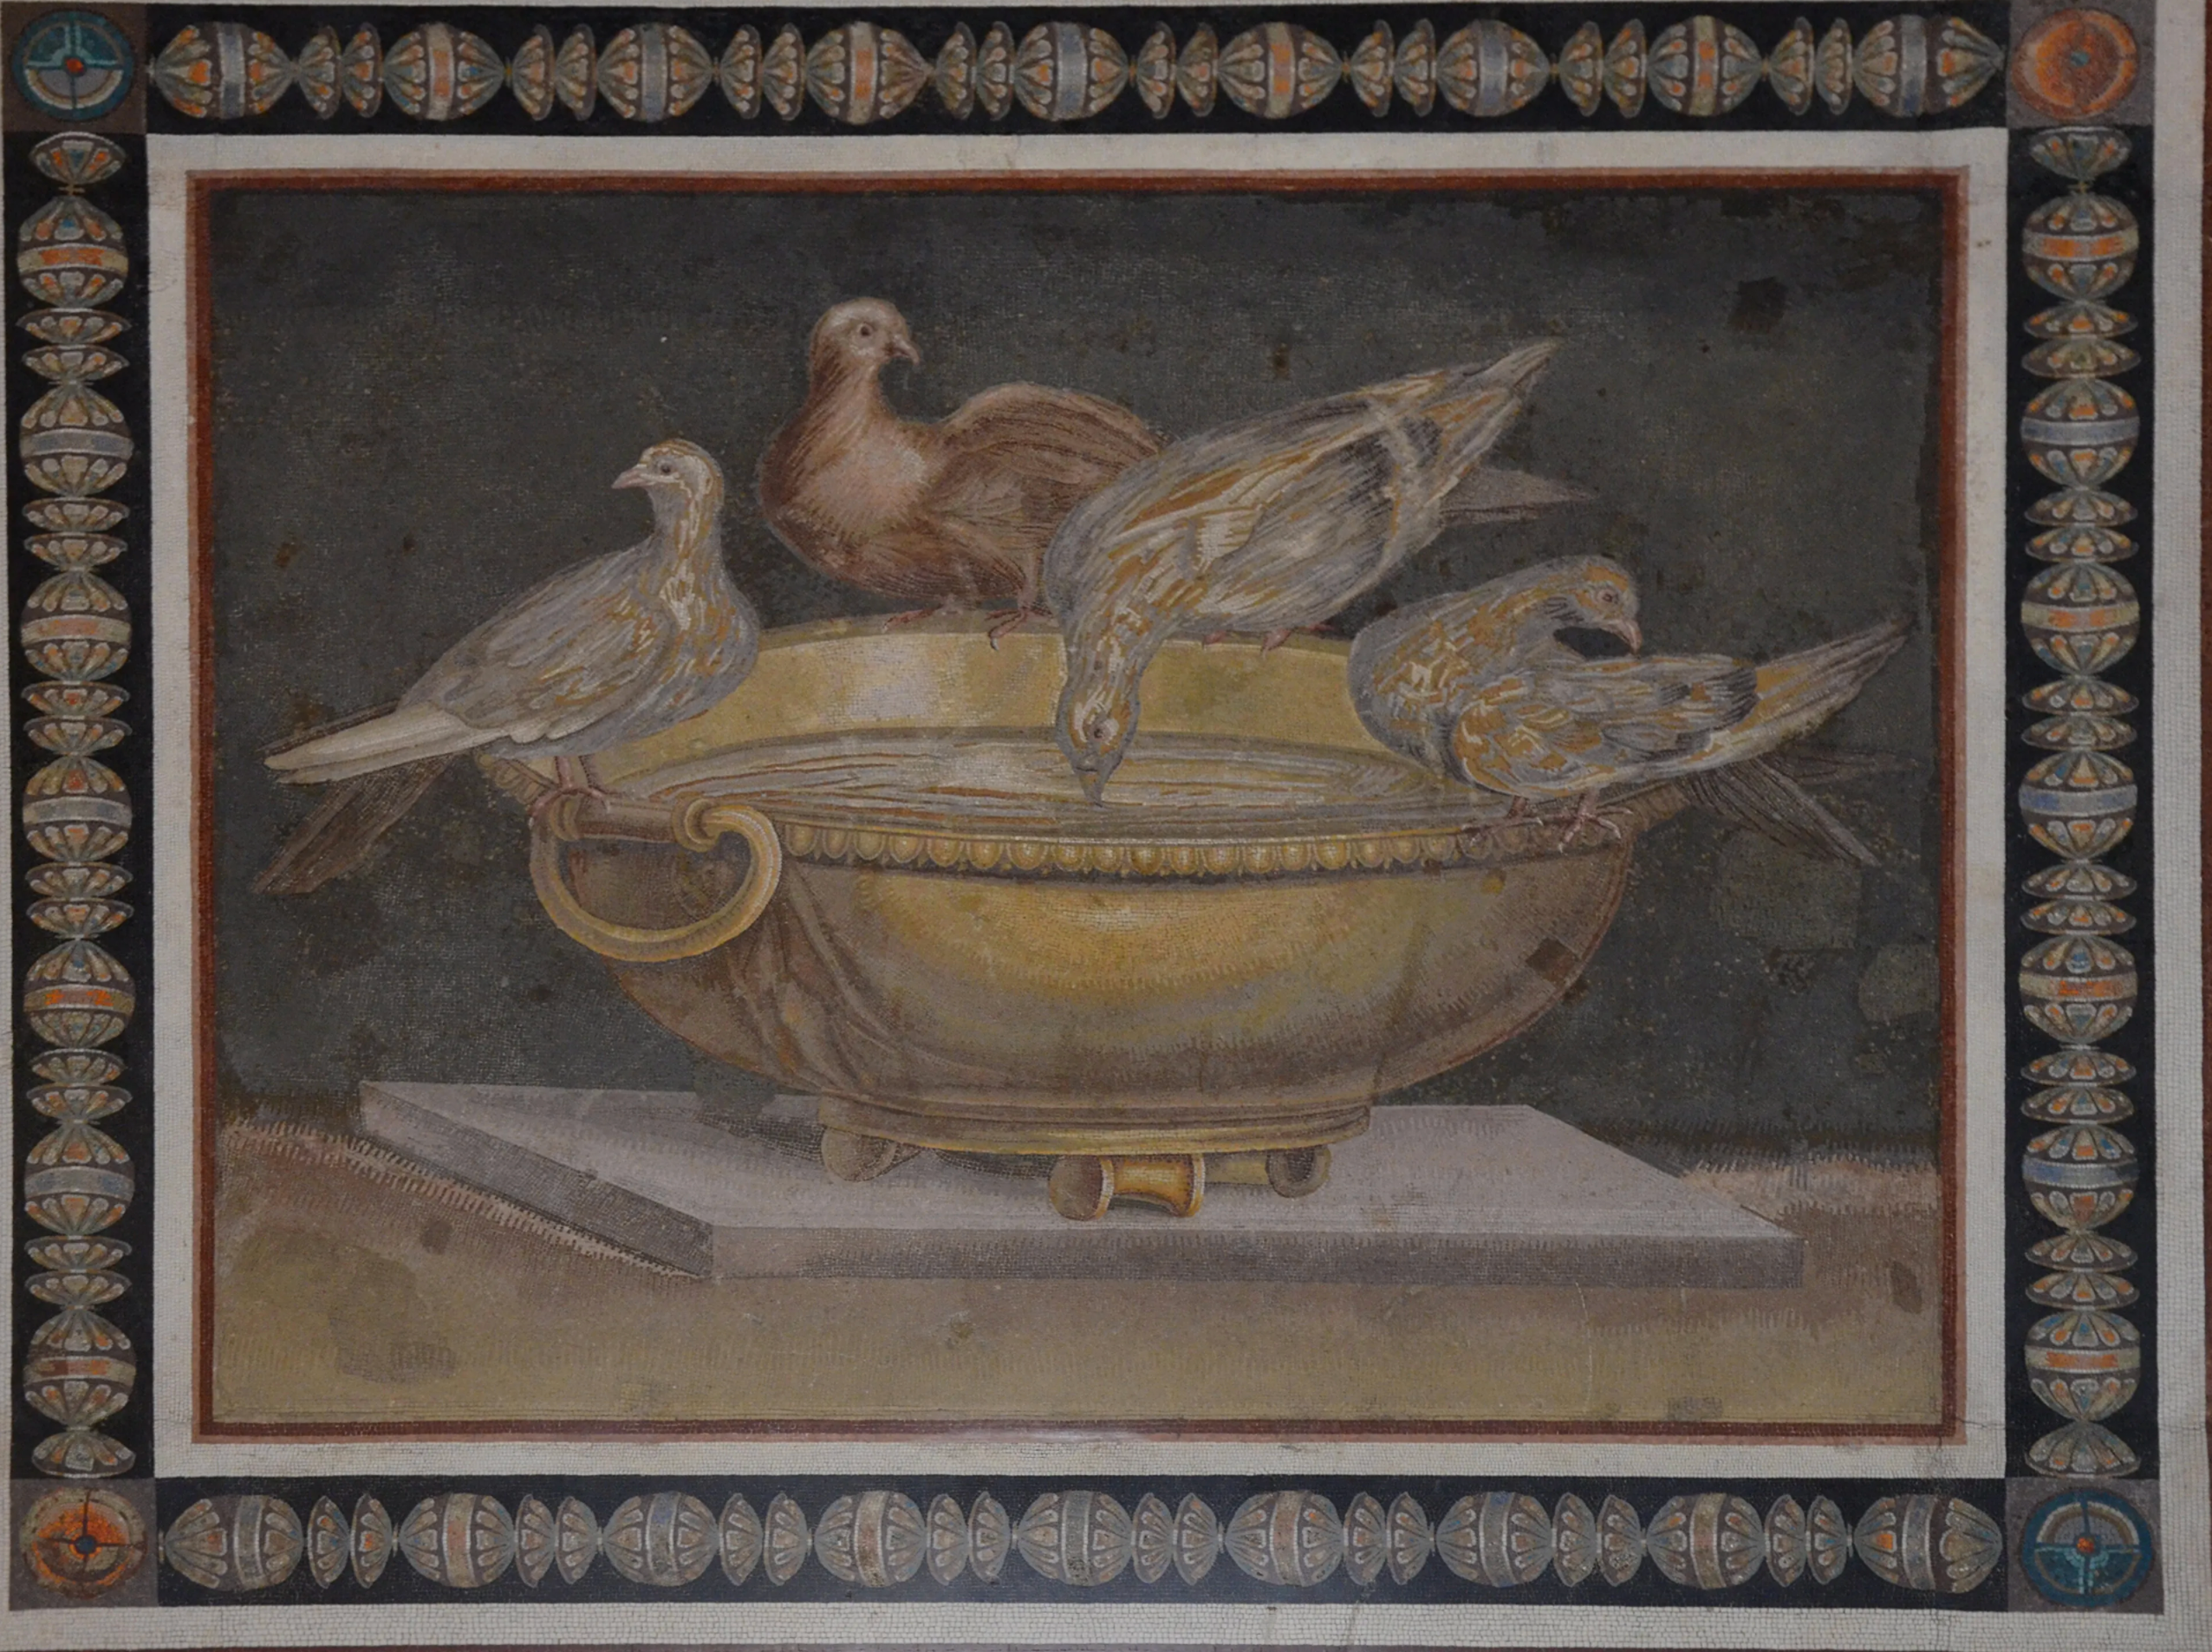 Mosaic showing doves drinking from a bowl, from Hadrian’s villa, 2nd century AD, probably a copy of Sosus’s work (2nd century BC), Musei Capitolini, Rome